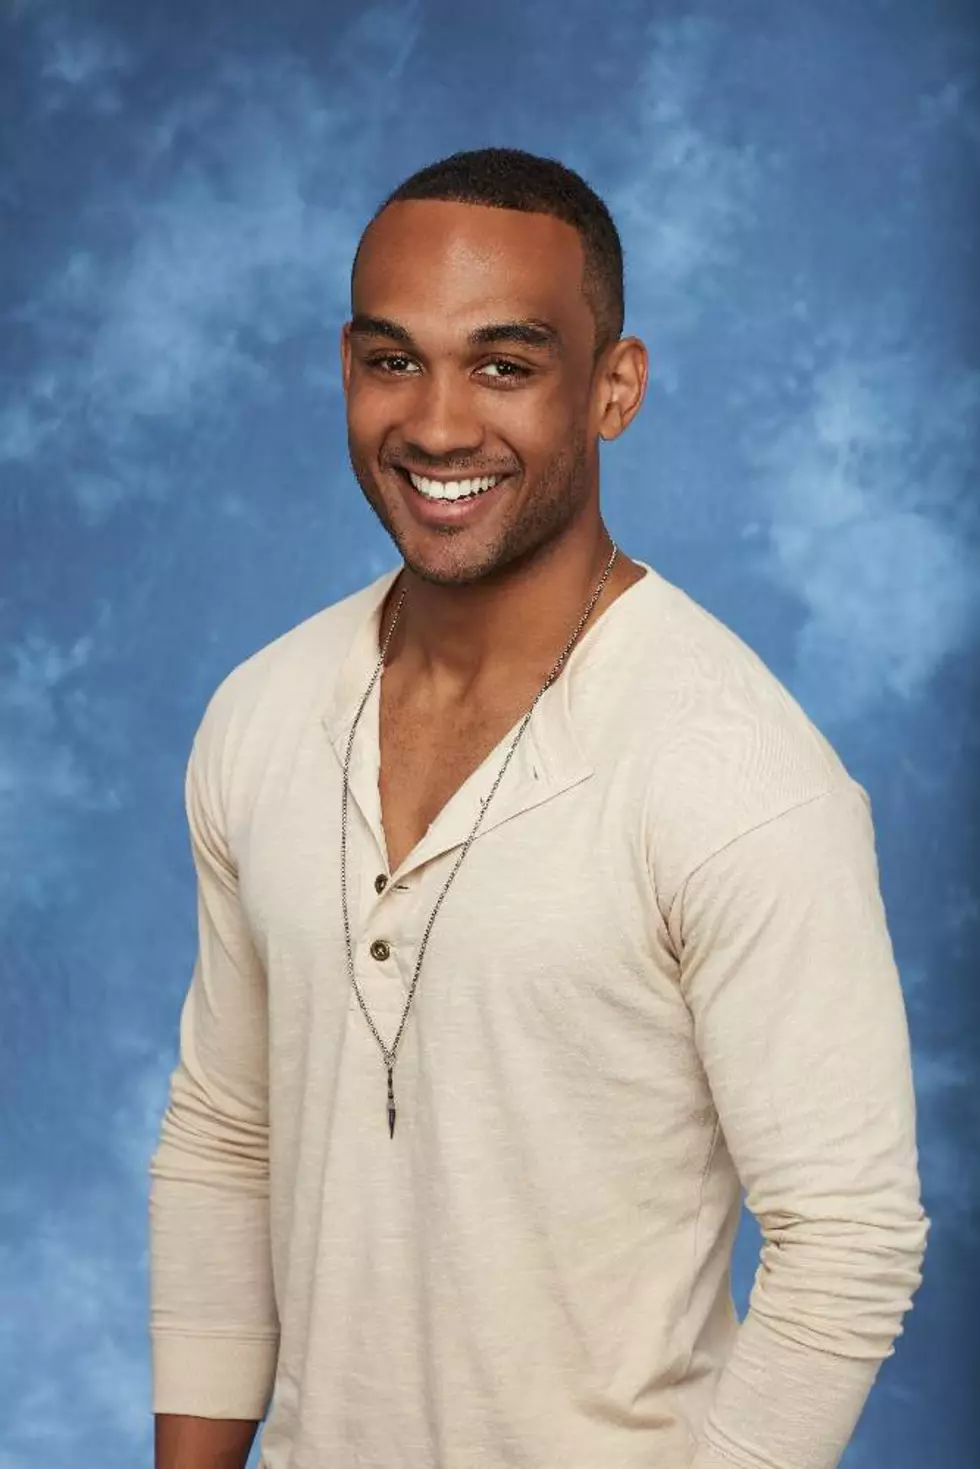 Goz’s Former Roommate Voted Off ABC’s “The Bachelorette”